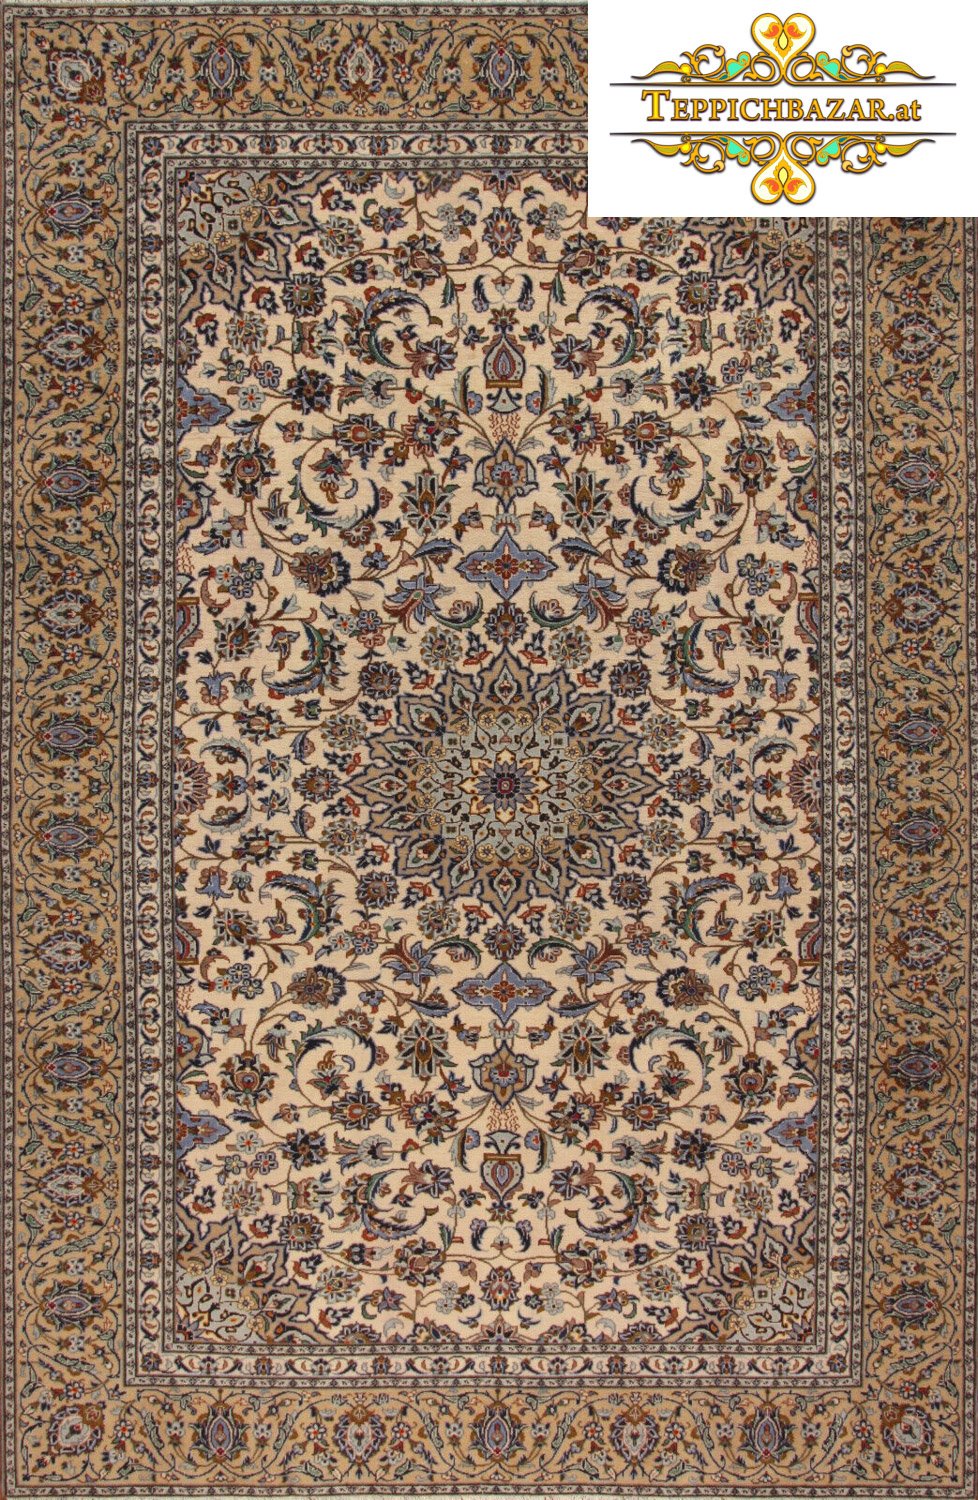 (#H1167) APPROX. 340X220CM HAND KNOTTED KASHAN (KASHAN) PERSIAN CARPET PERSIAN CARPET,KASHAN,KASHAN,WOOL,ORIENTAL CARPET,CARPET BAZAR,CARP,RUGS,PATTERNS,ZIEGLER,ORIENTAL CARPETS TYPE: PERSIAN CARPET WITH SIGNATURE ORIGIN: KASHAN (KASHAN) FLOOR: 100% W ROLLS WITHOUT ADDITION CHAIN: 100% COTTON SIZE: 340X220CM KNOT COUNT: APPROX. 160.000 KNOTS PER M² CONDITION: VERY GOOD, IN TOP CONDITION PERSIAN CARPET ORIENTAL CARPET